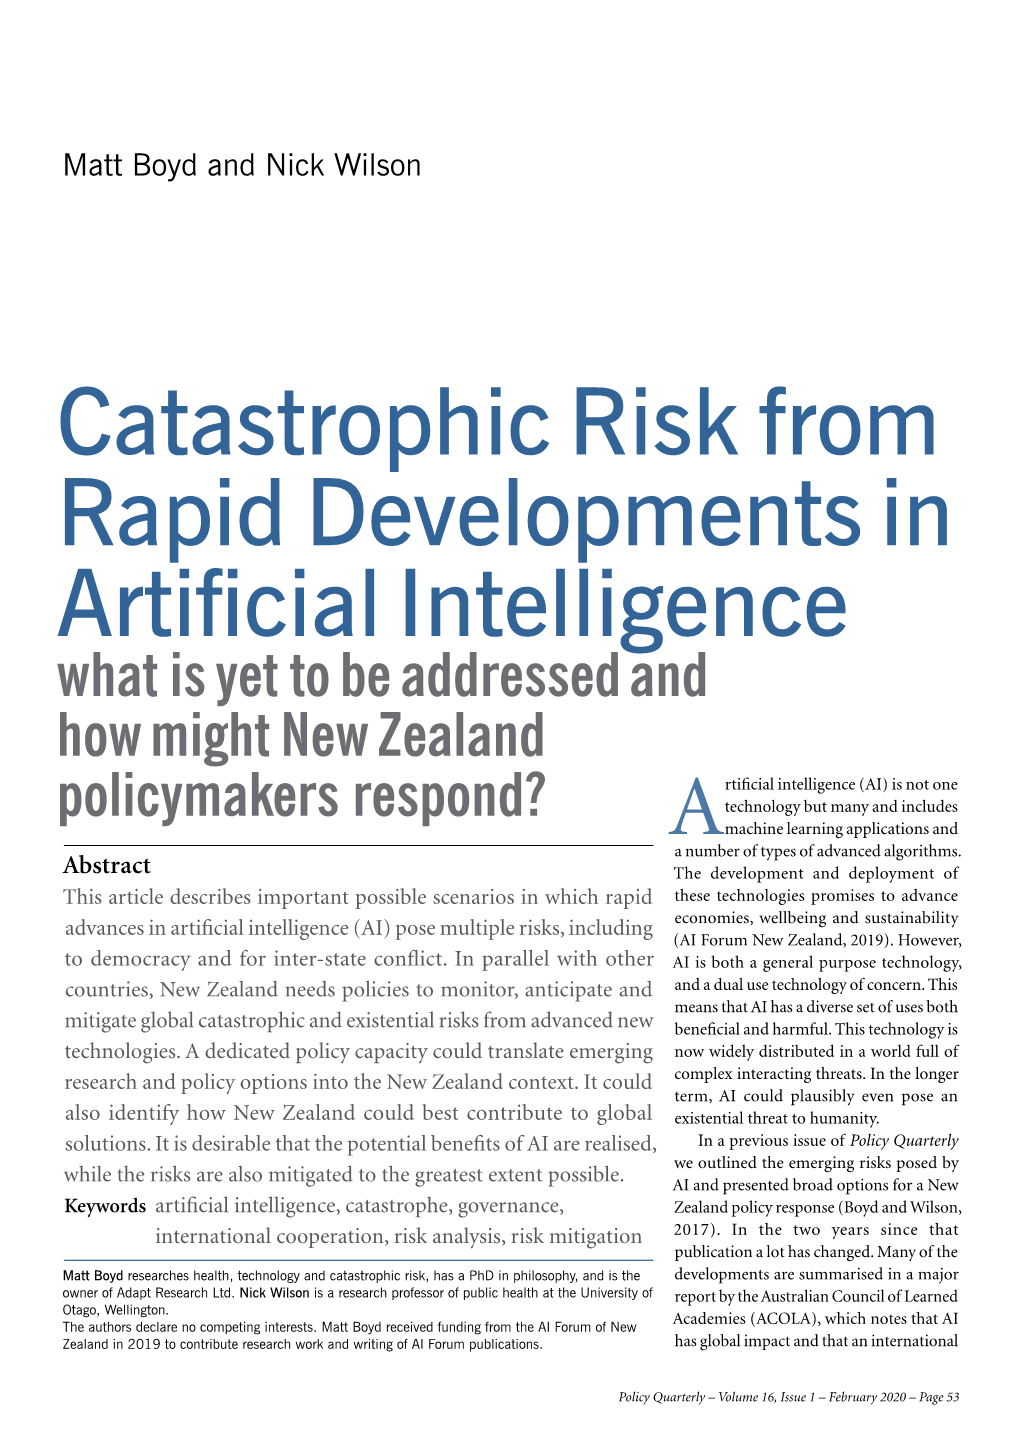 Catastrophic Risk from Rapid Developments in Artificial Intelligence